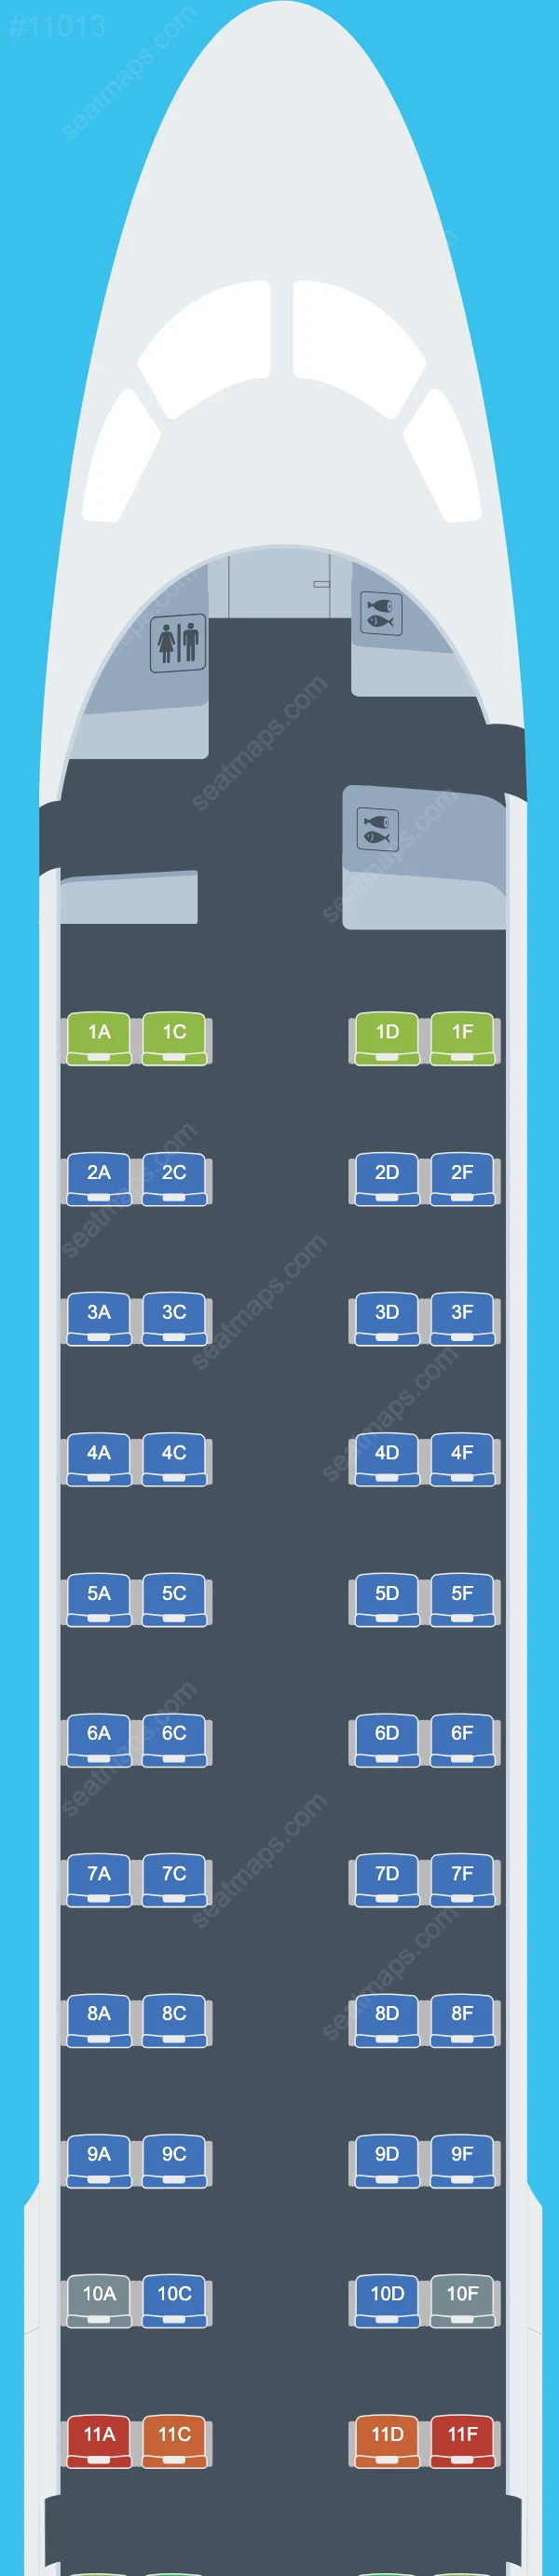 Breeze Airways Embraer E190 seatmap mobile preview